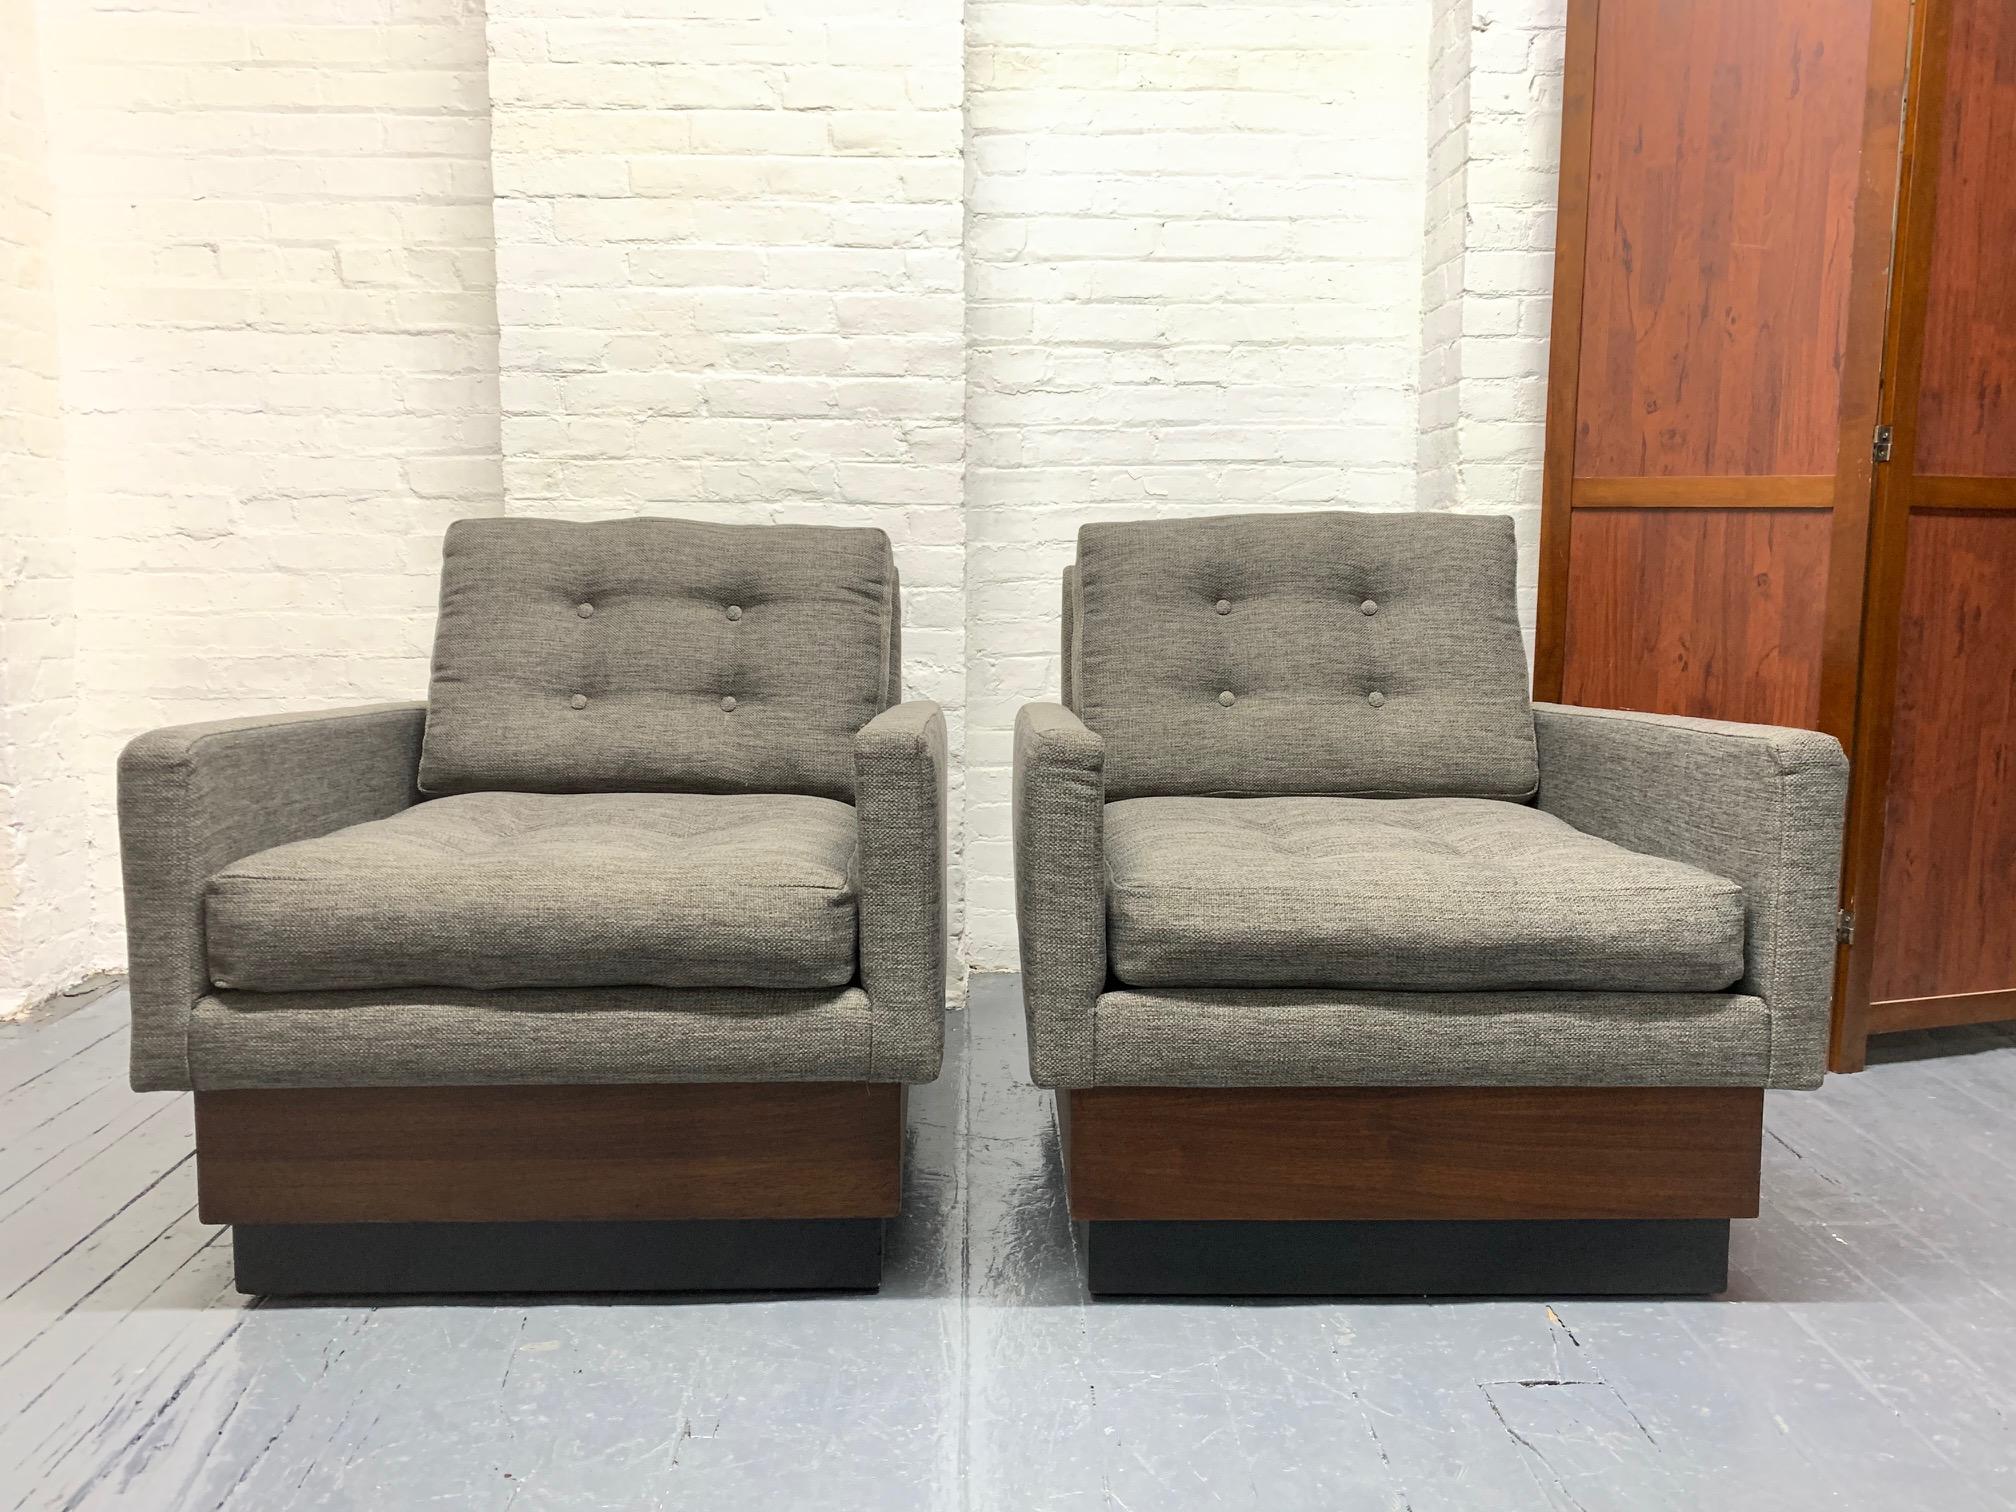 Pair of Mid-Century Modern lounge chairs. Has a walnut and black lacquered plinth base. Loose, tufted cushioned seat and back.